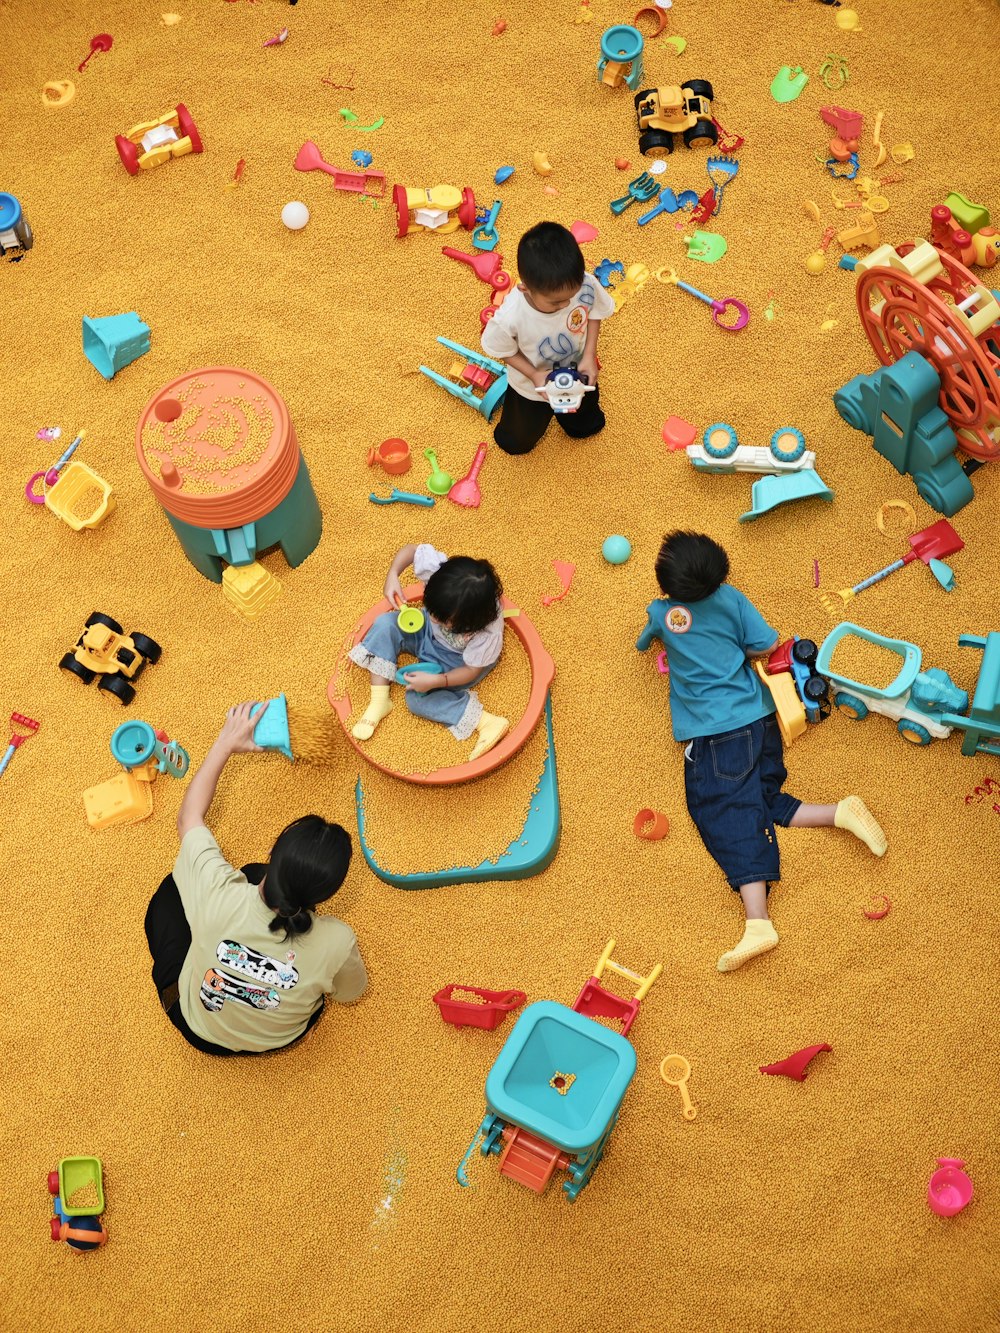 a group of children playing in a play area